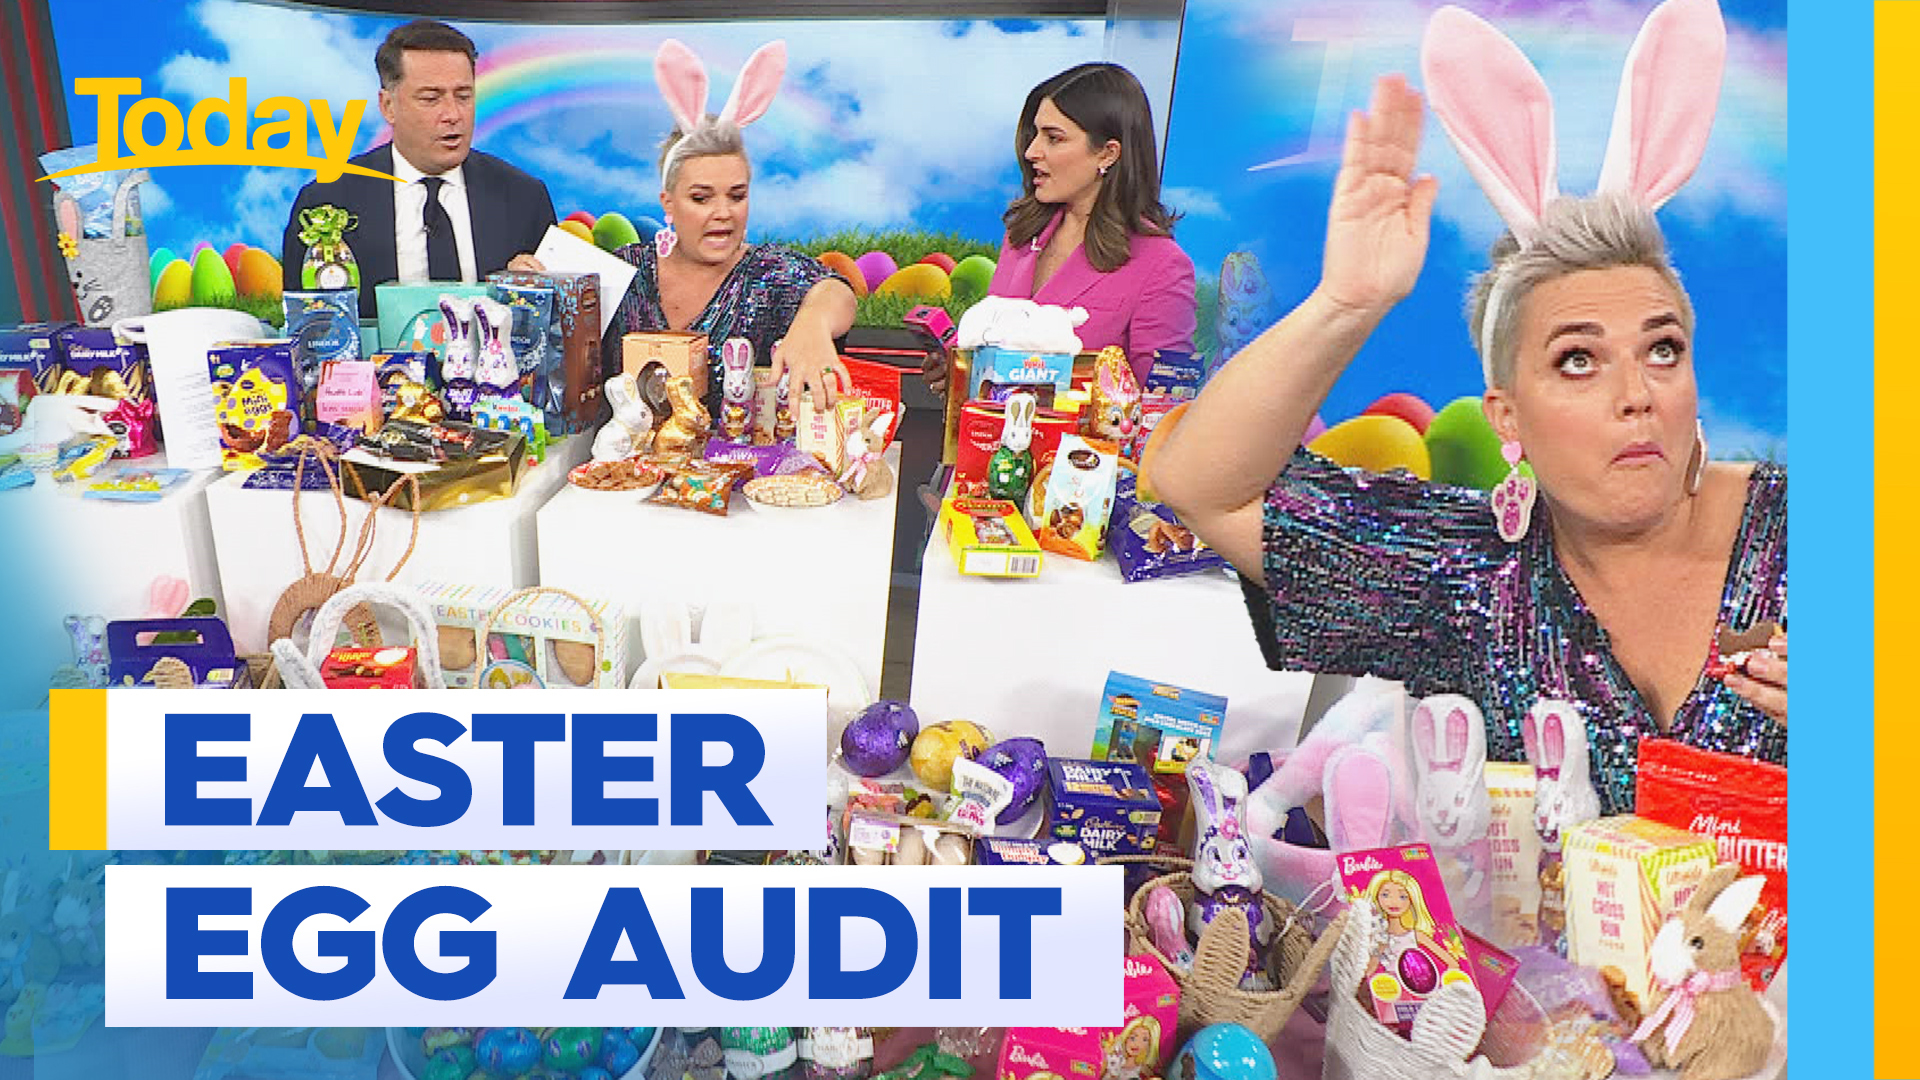 Today's ultimate Easter egg audit